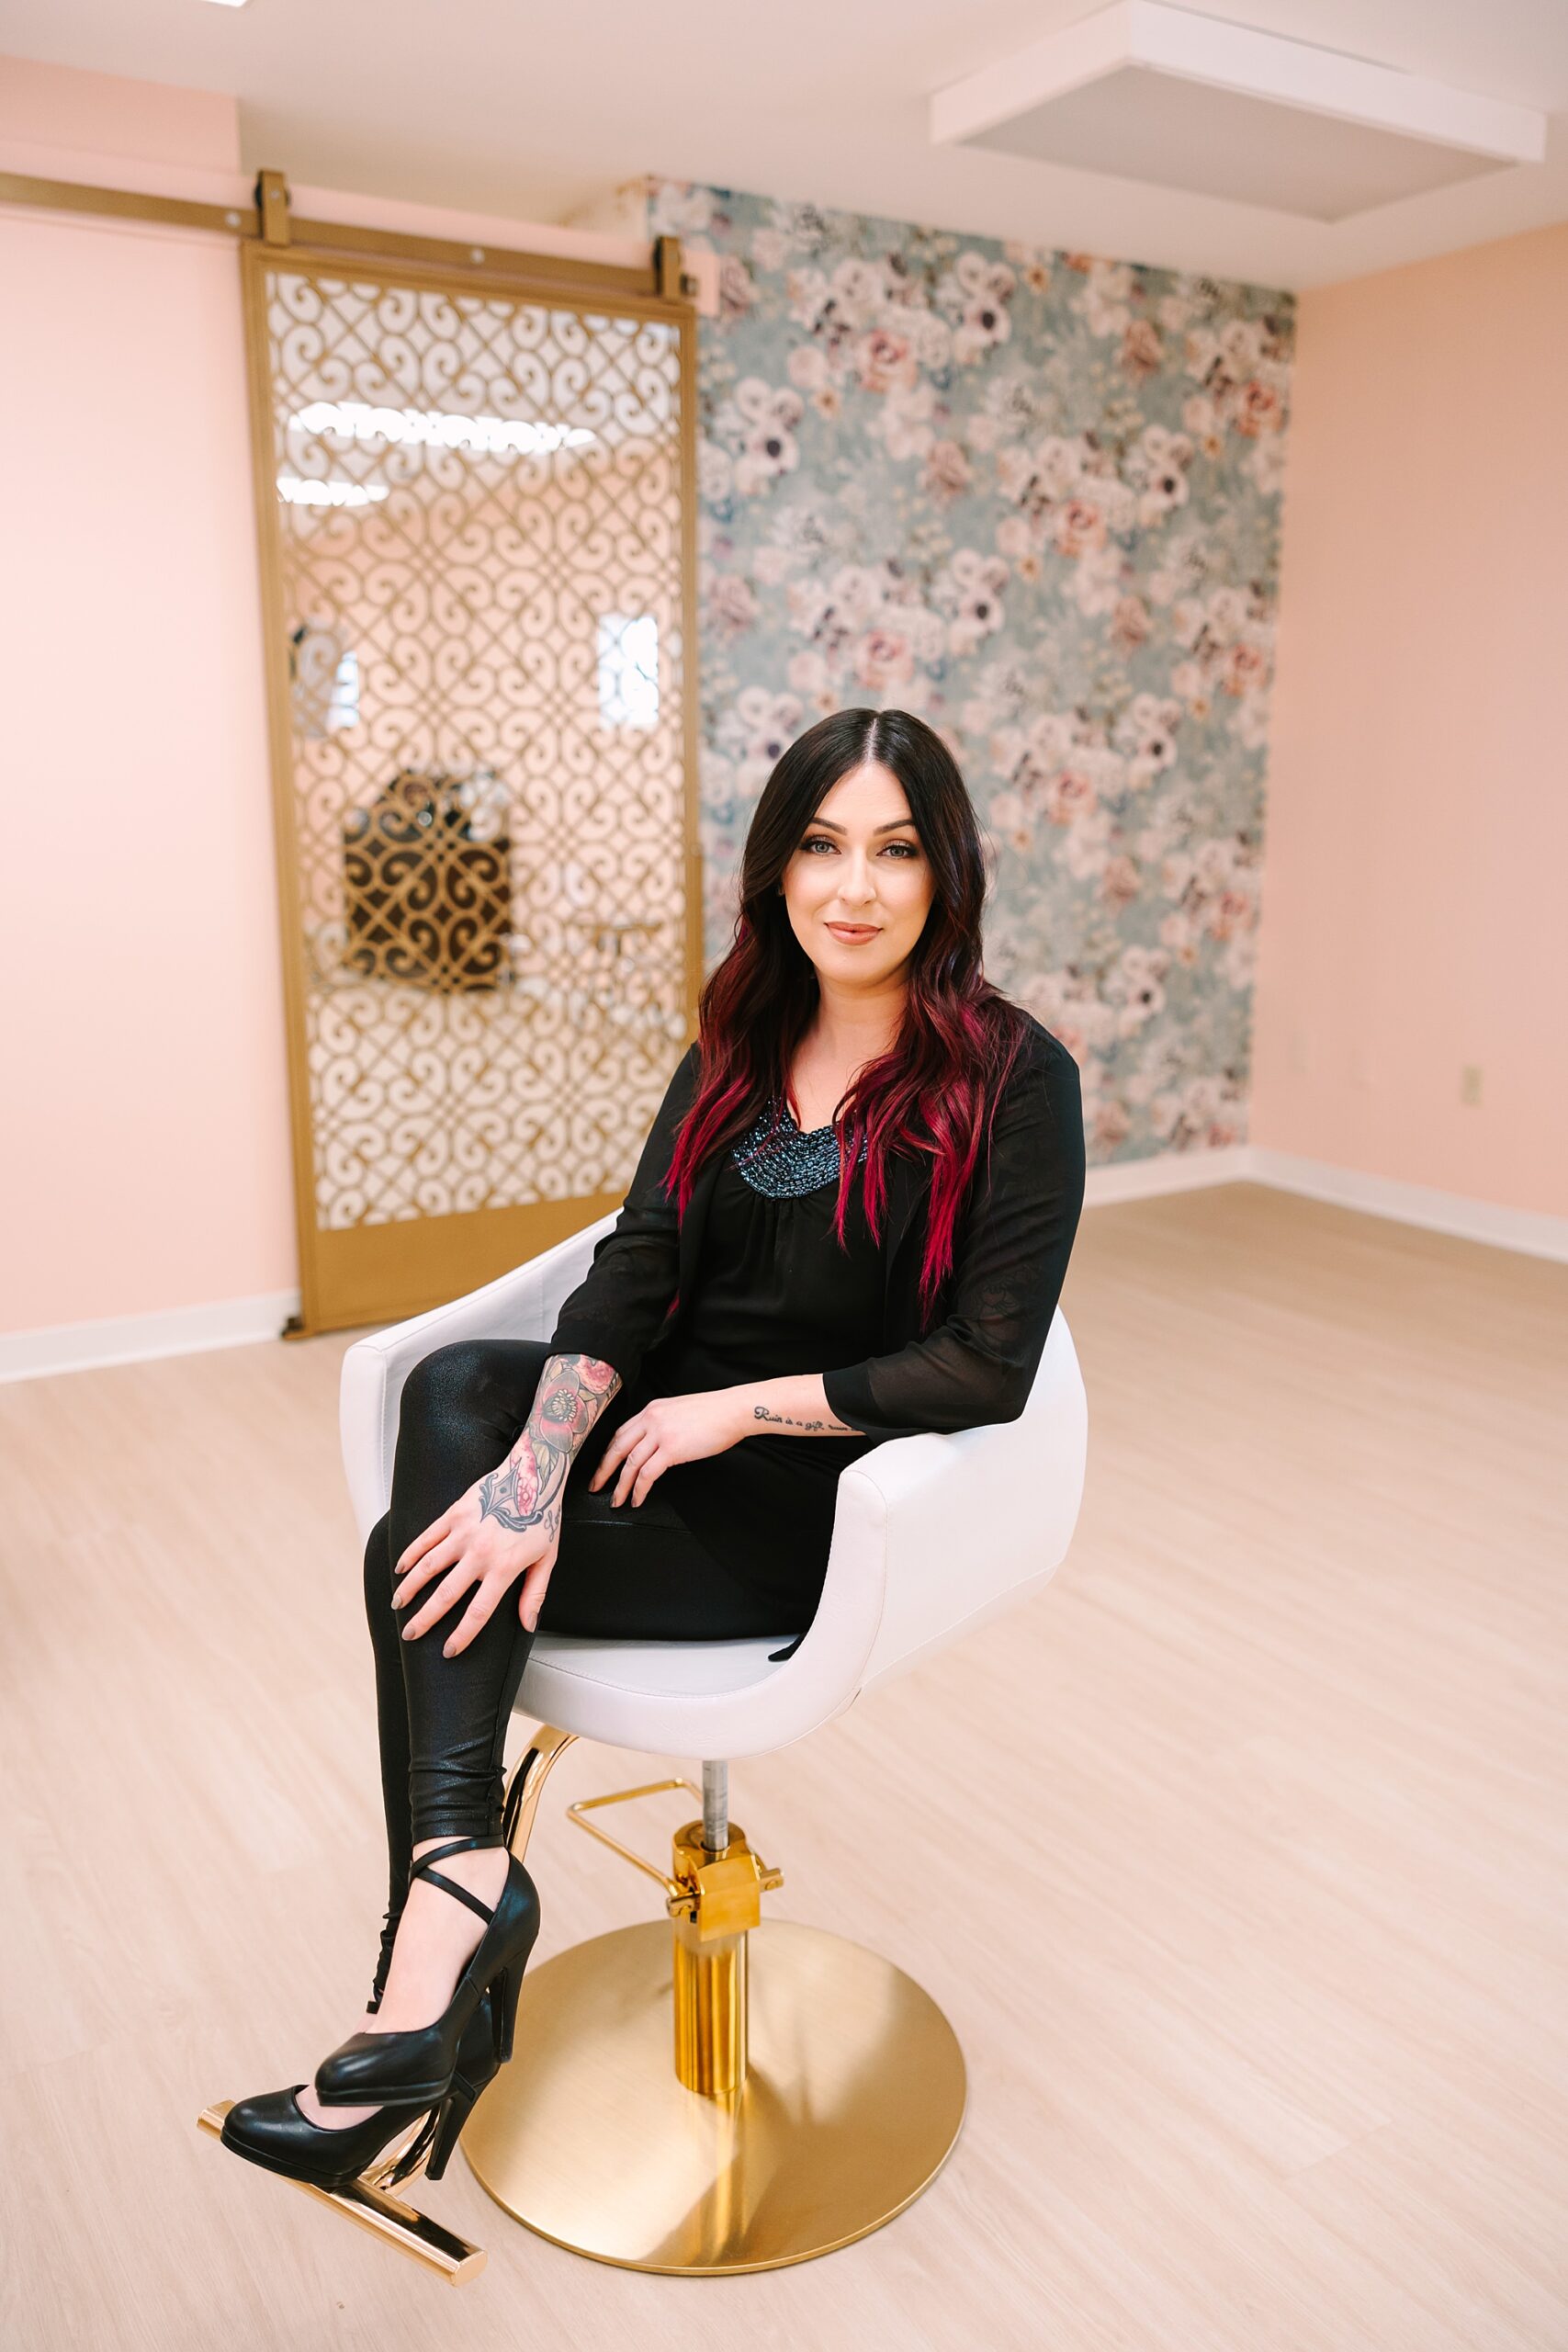 dark haired stylist sits in white chair during MHD Beauty Parlor branding session